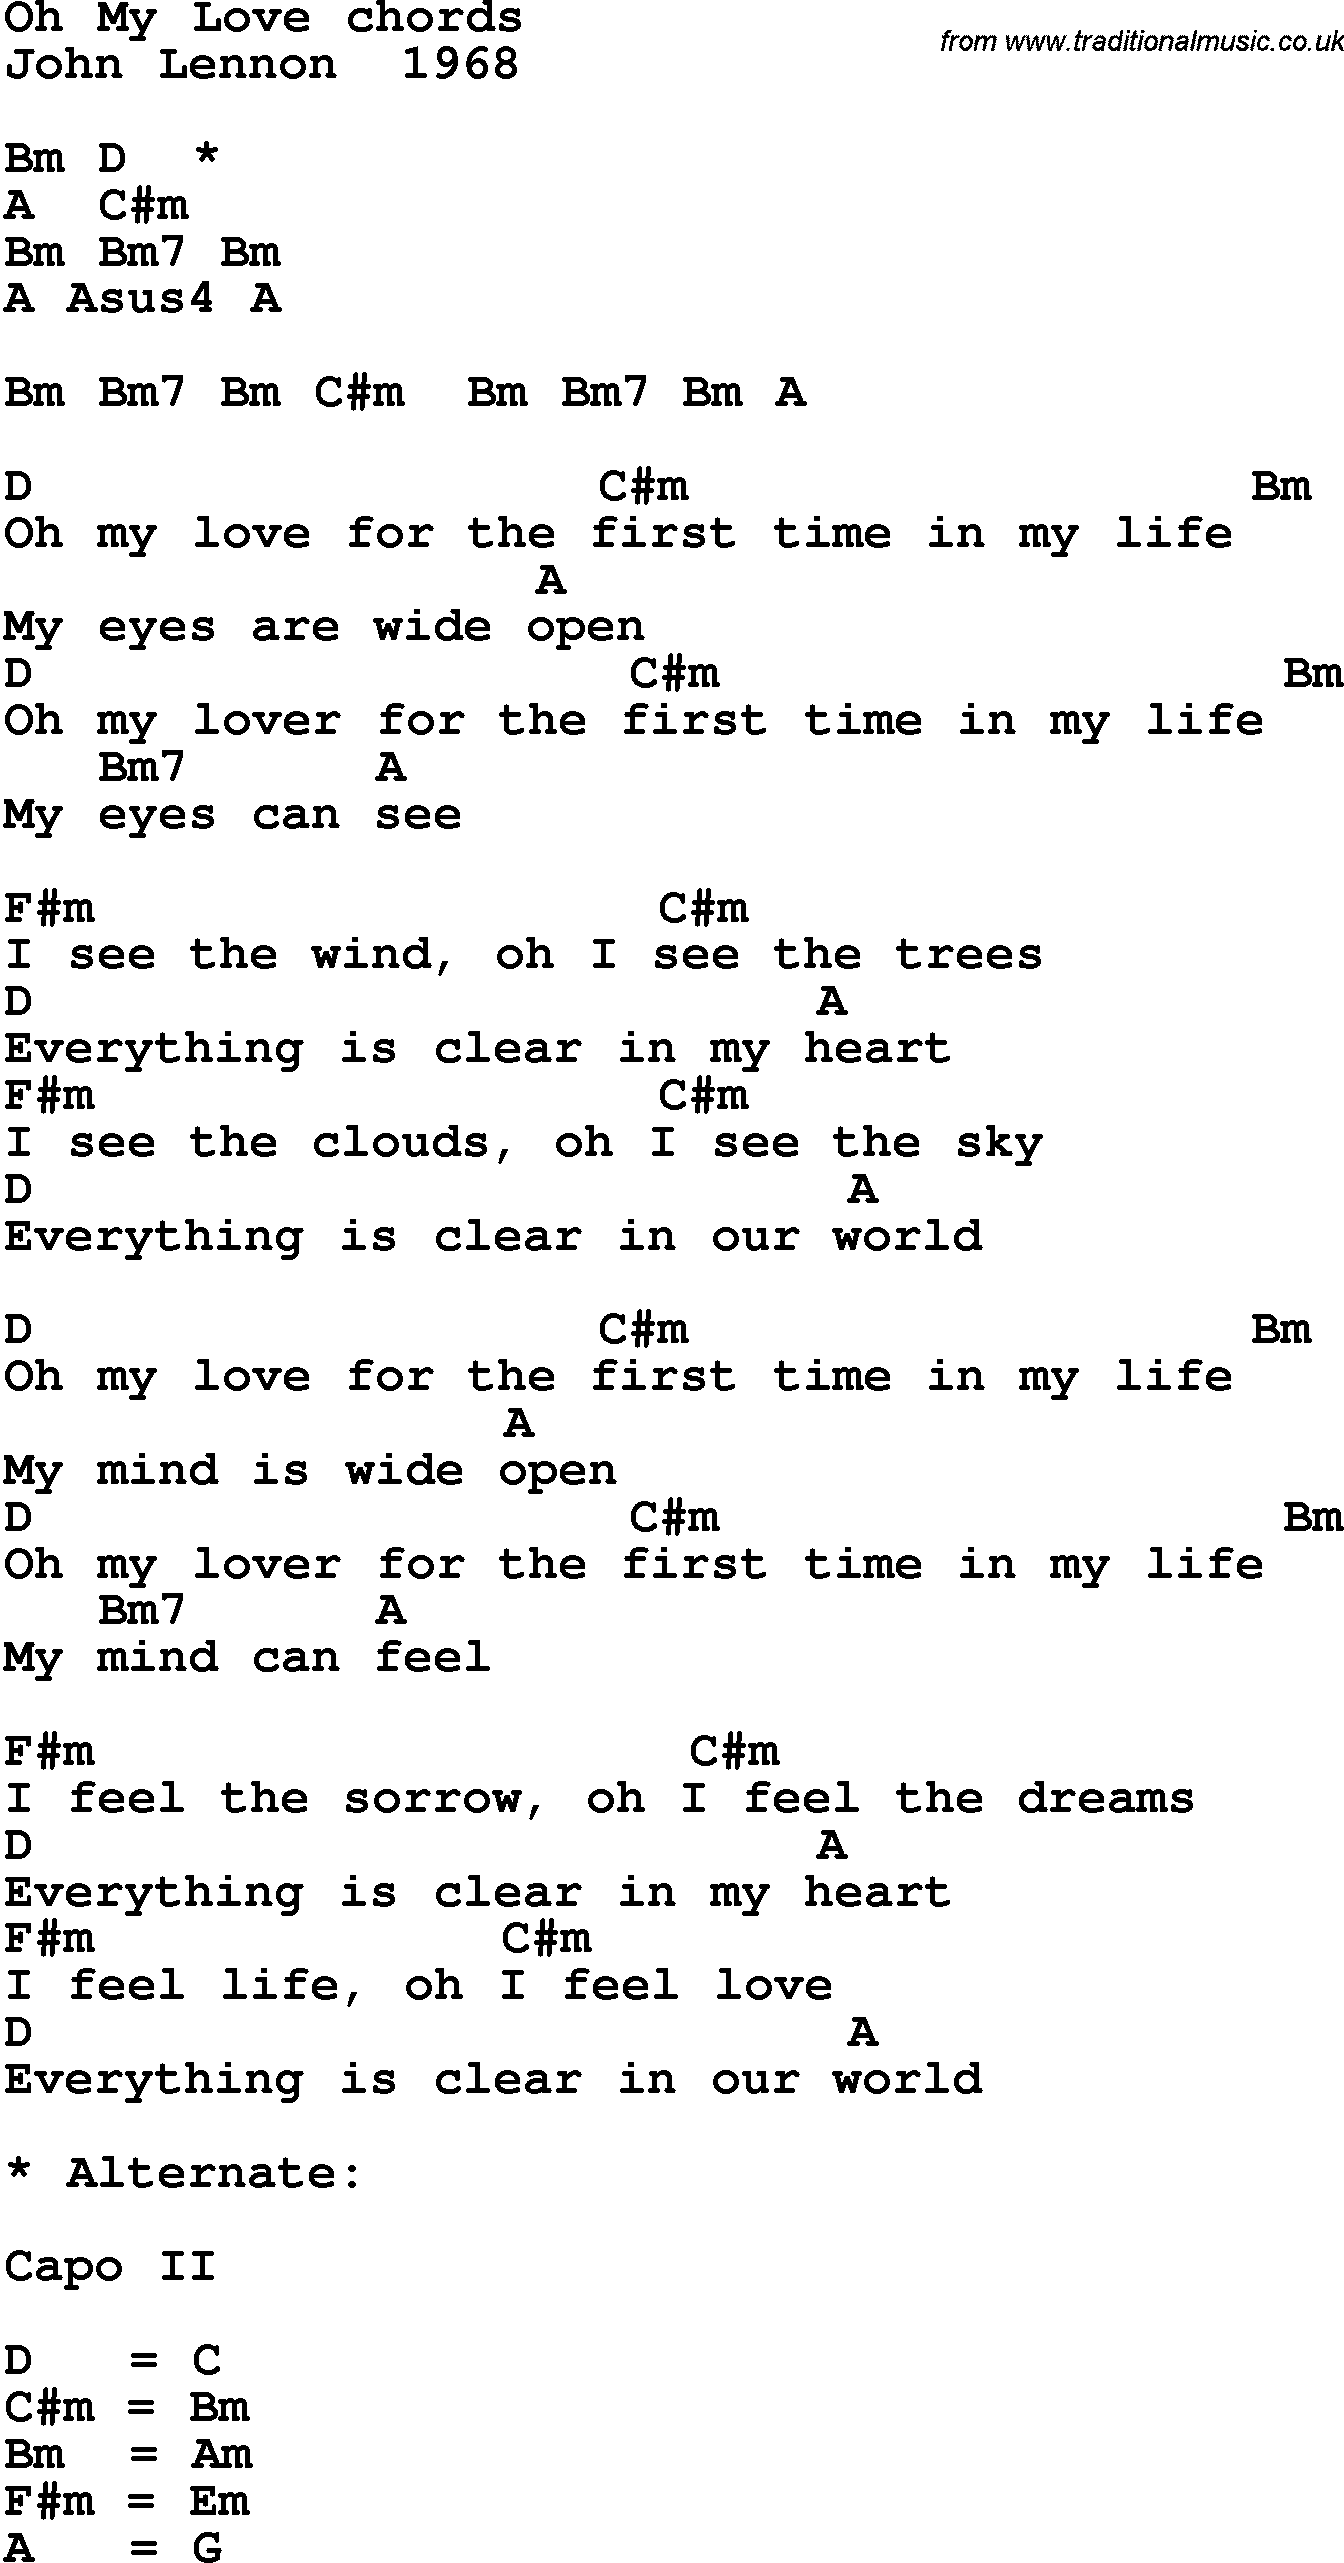 Song Lyrics with guitar chords for Oh My Love